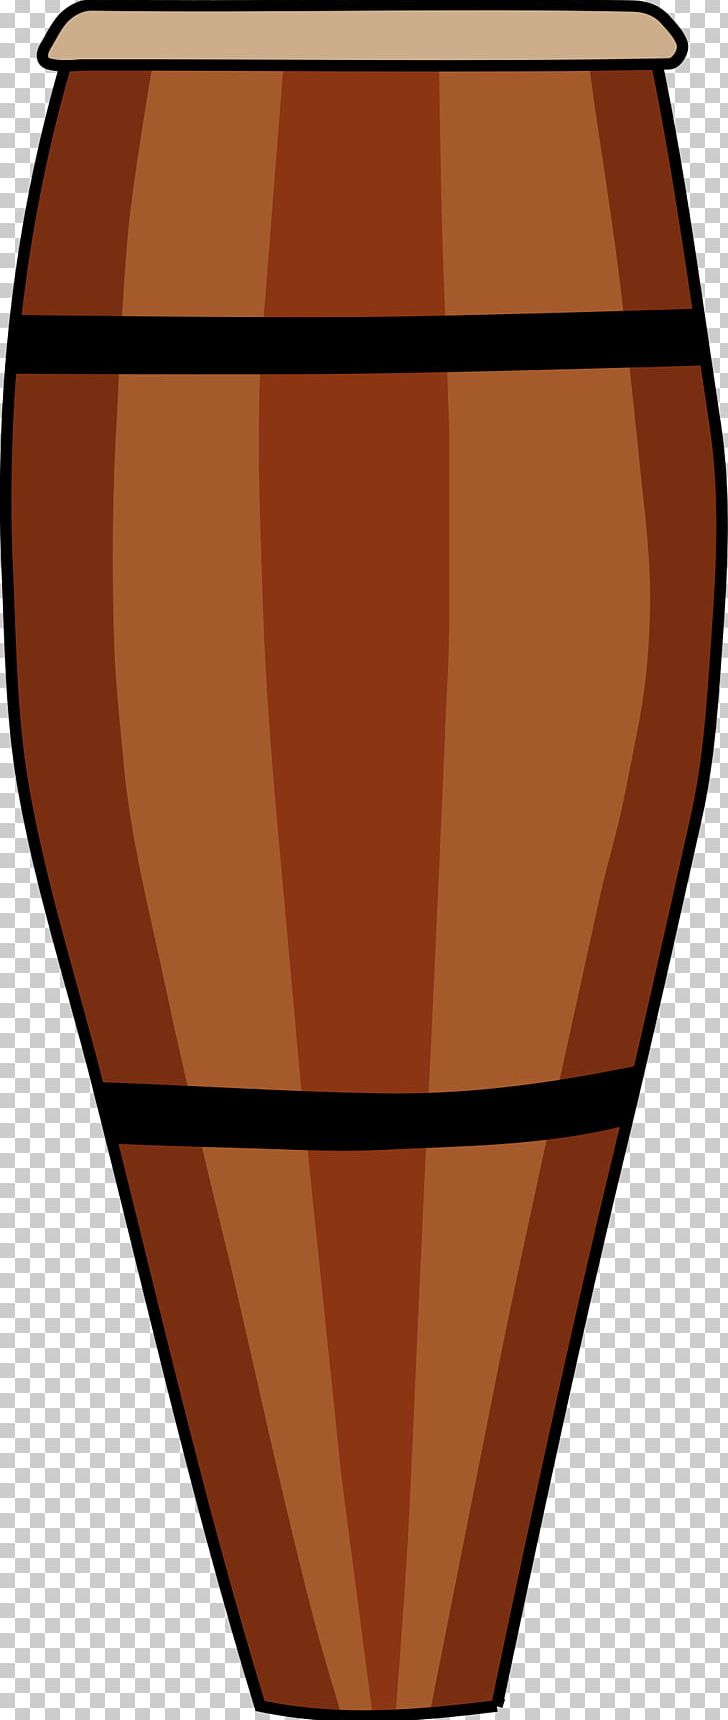 Musical Instruments Drum Atabaque PNG, Clipart, Atabaque, Conga, Djembe, Download, Drum Free PNG Download